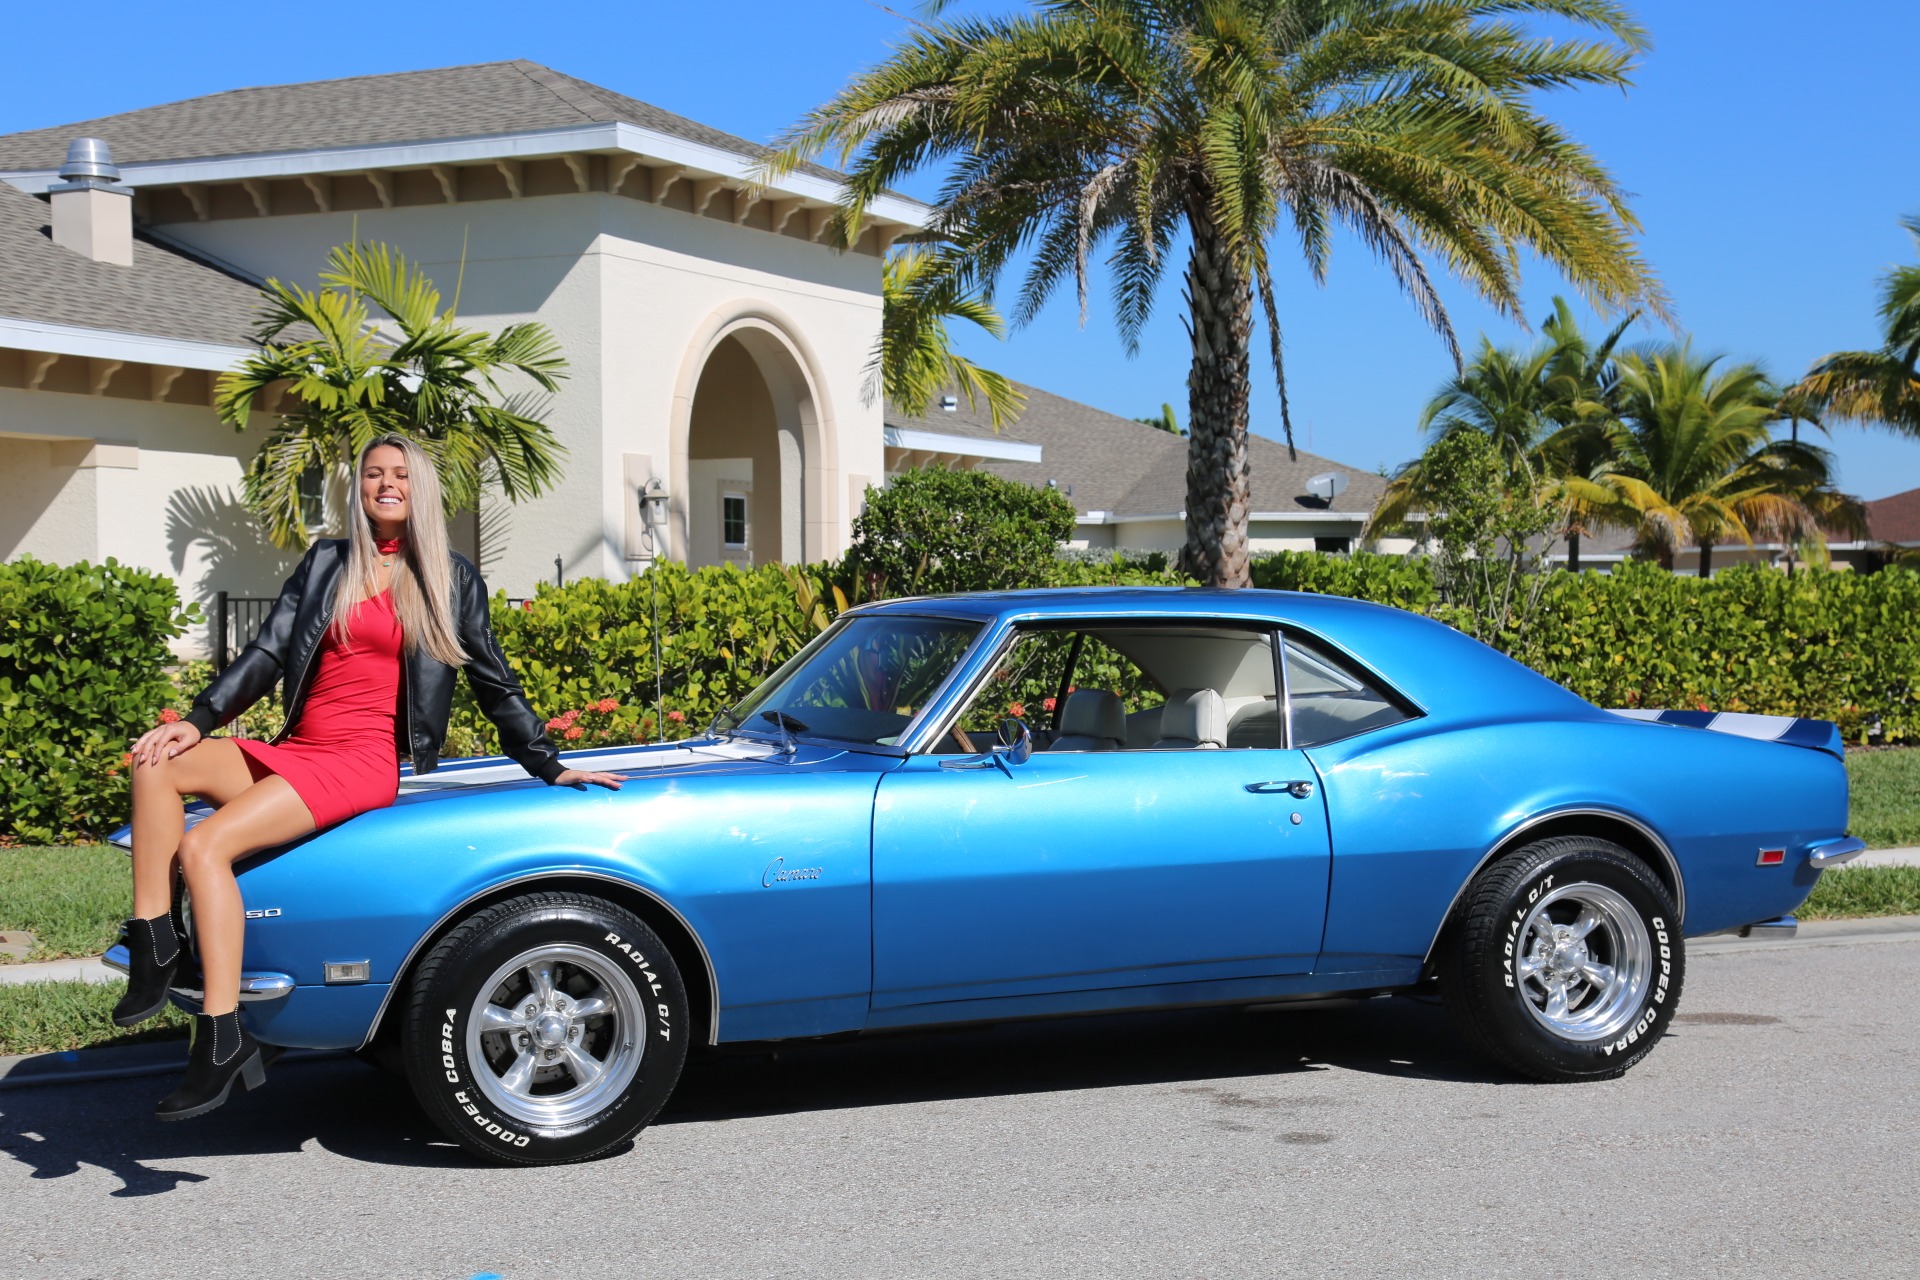 Used 1968 Chevy Camaro Coupe 4 Speed manual 350 stroked to 383 Engine AC for sale Sold at Muscle Cars for Sale Inc. in Fort Myers FL 33912 3